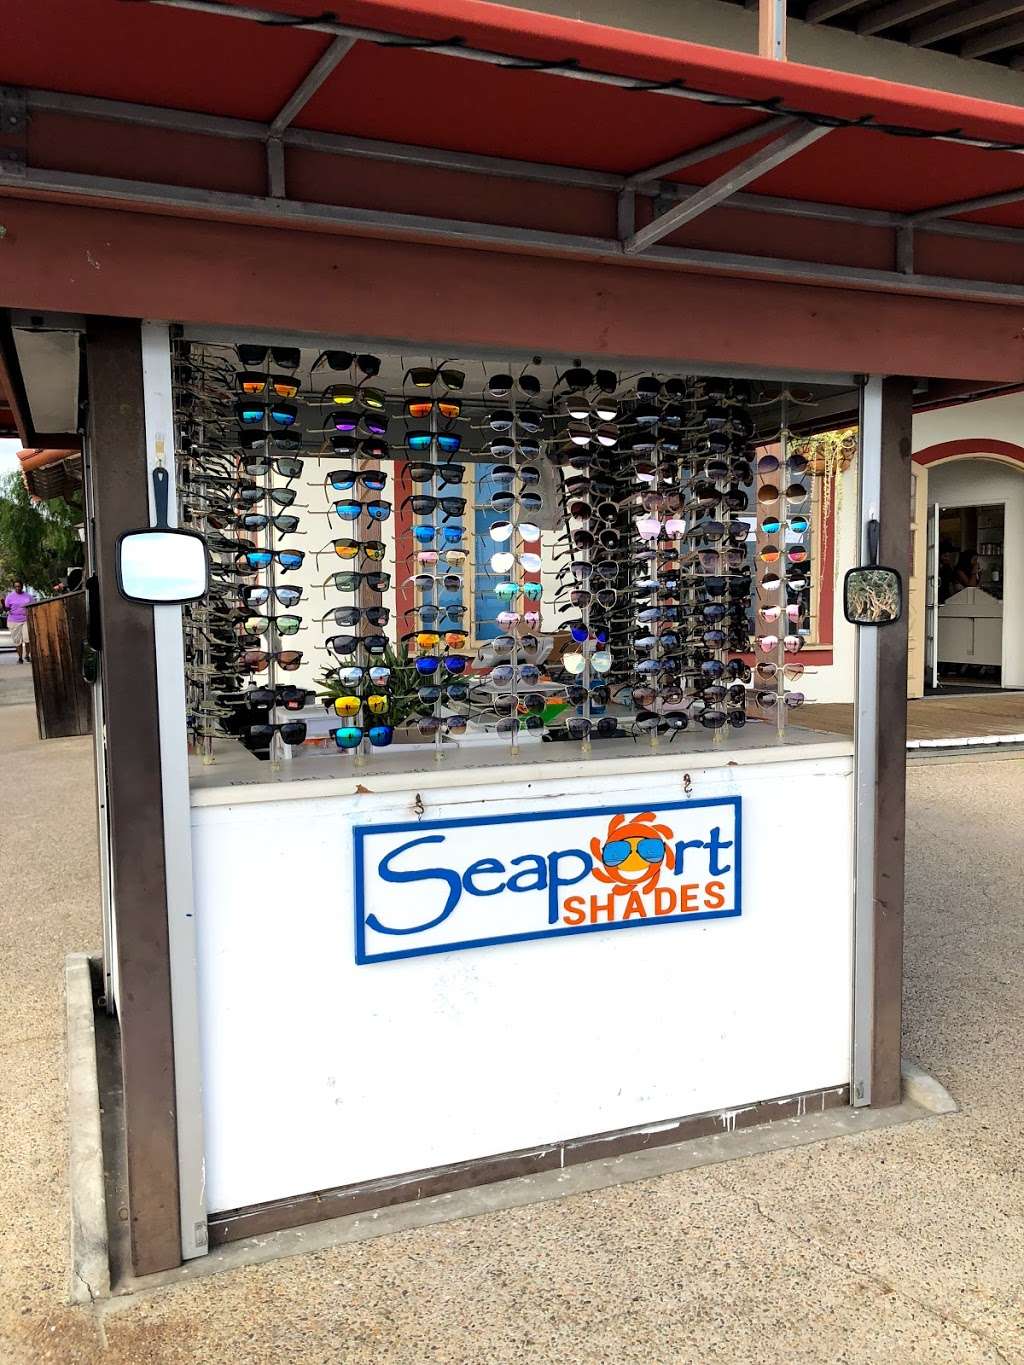 Seaport Shades - store  | Photo 2 of 4 | Address: 849 W Harbor Dr, San Diego, CA 92101, USA | Phone: (619) 248-1065